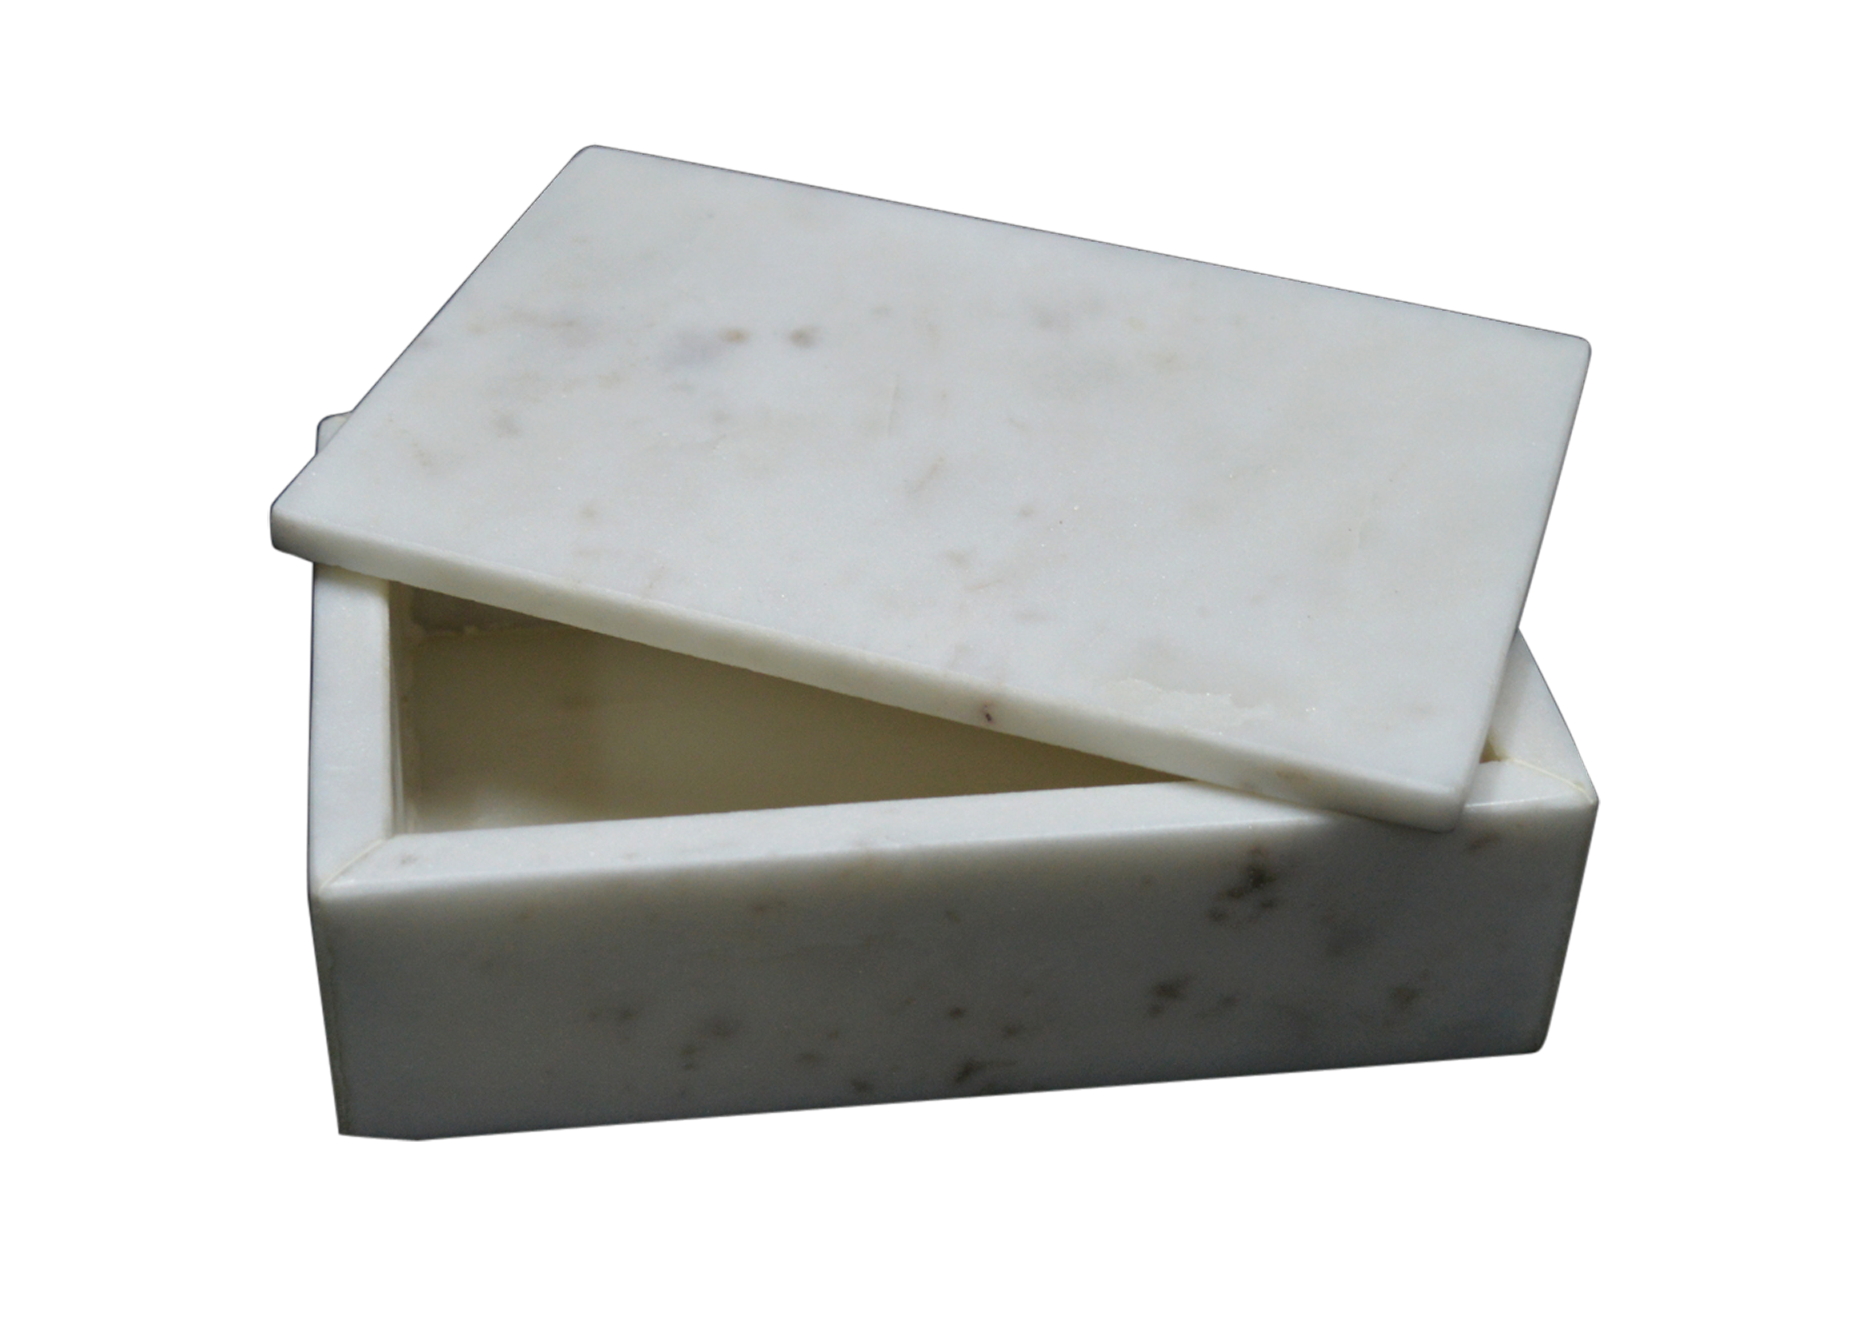 White Marble Box with Lid (2 Sizes)